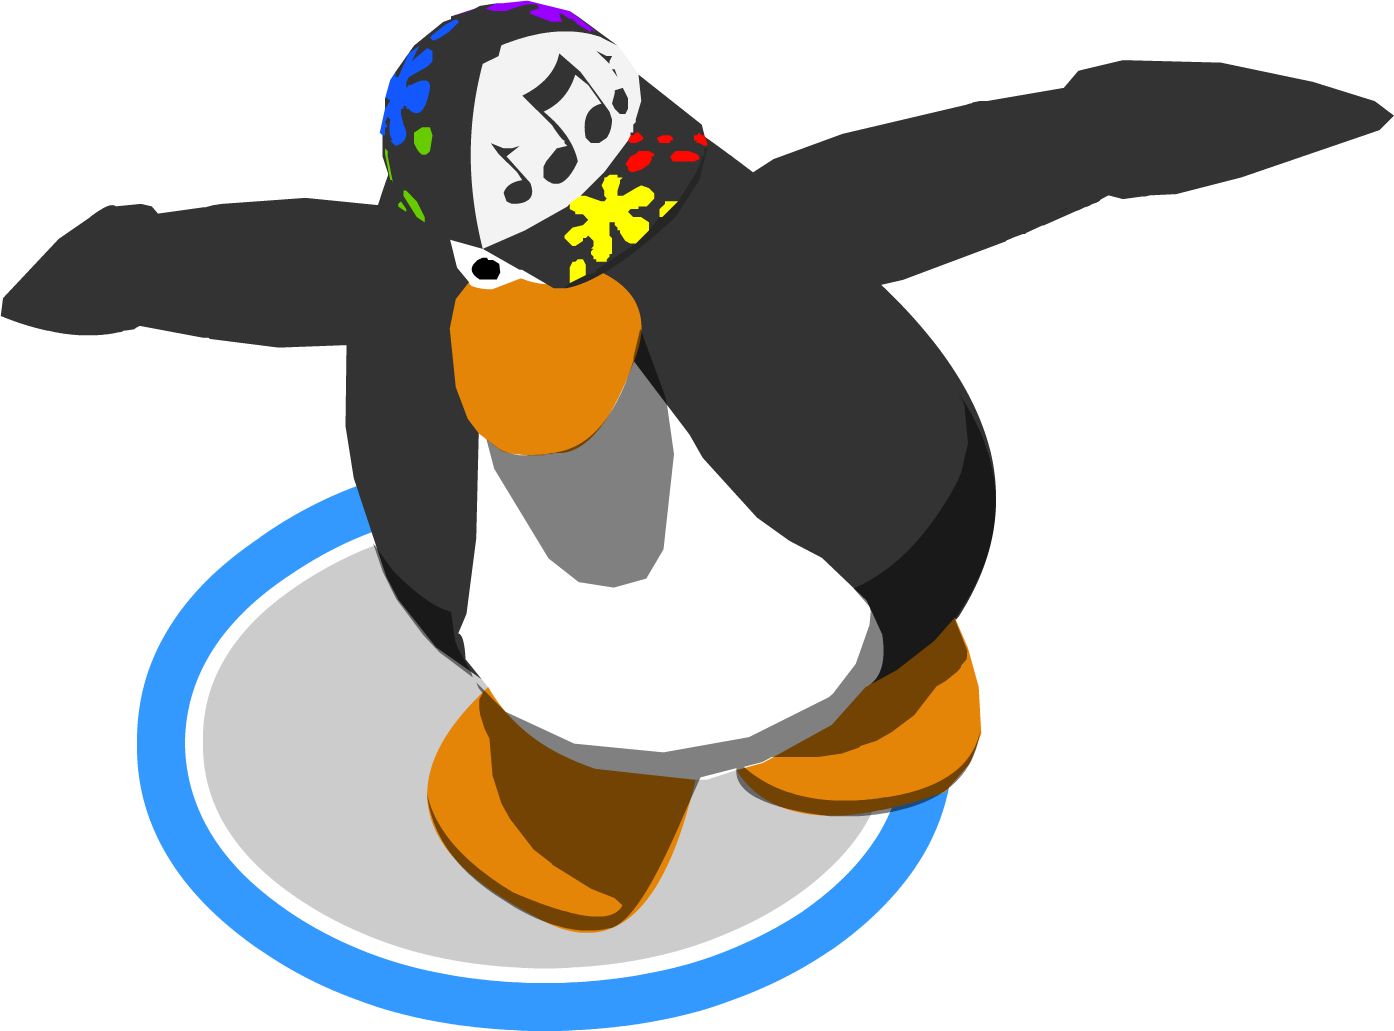 A 'classic' Reinstalment Of The Excessively Popular - Club Penguin Dance (1394x1031)